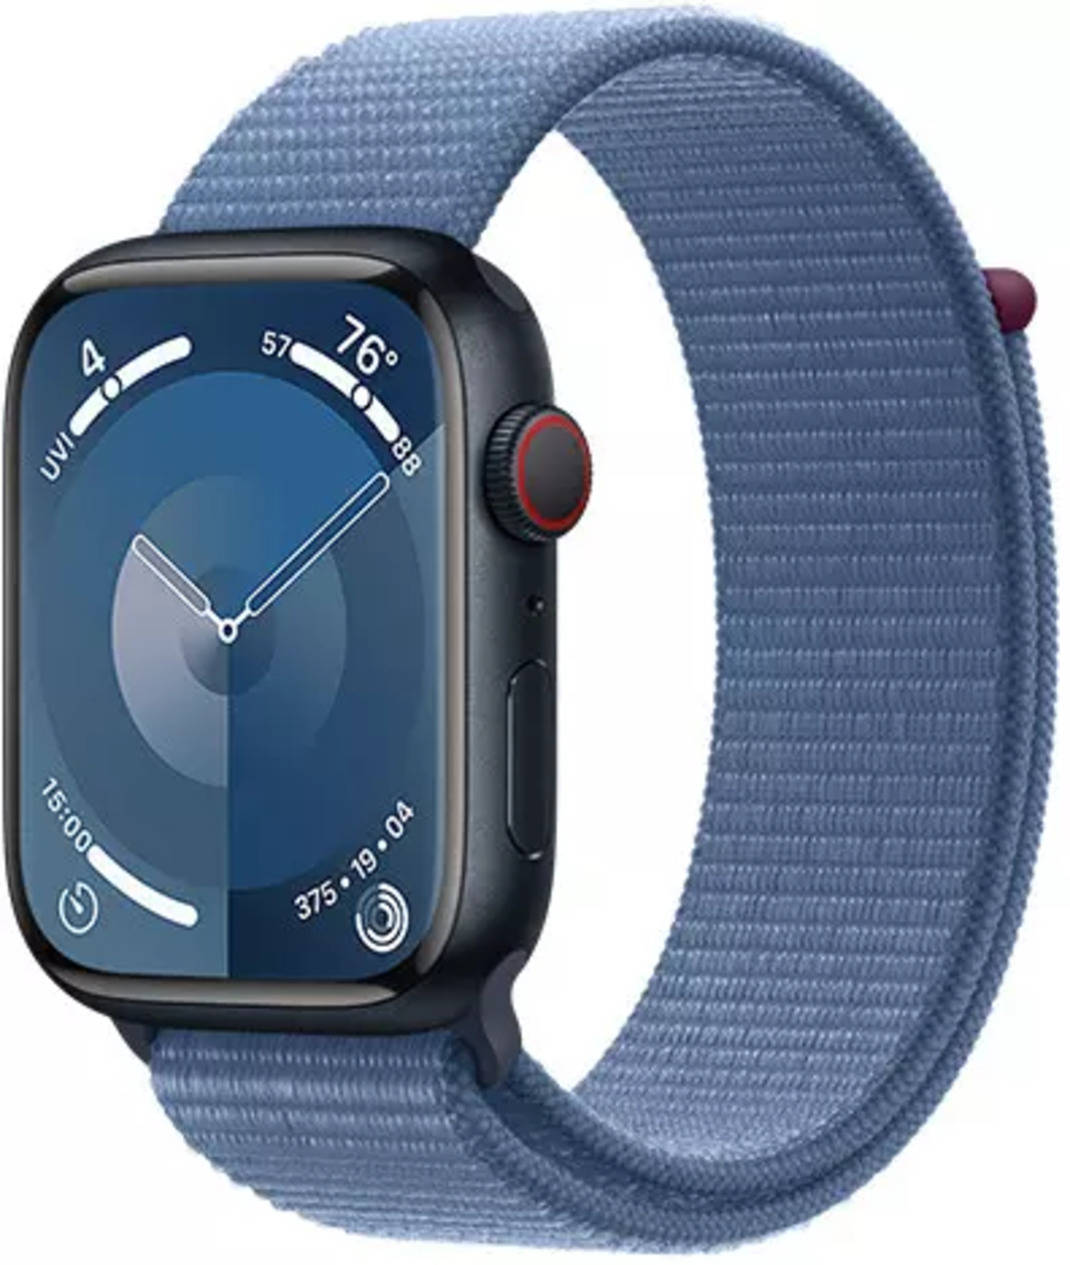 Apple Watch Series 9 vs. Ultra 2: Which one should you buy? - CyberGuy